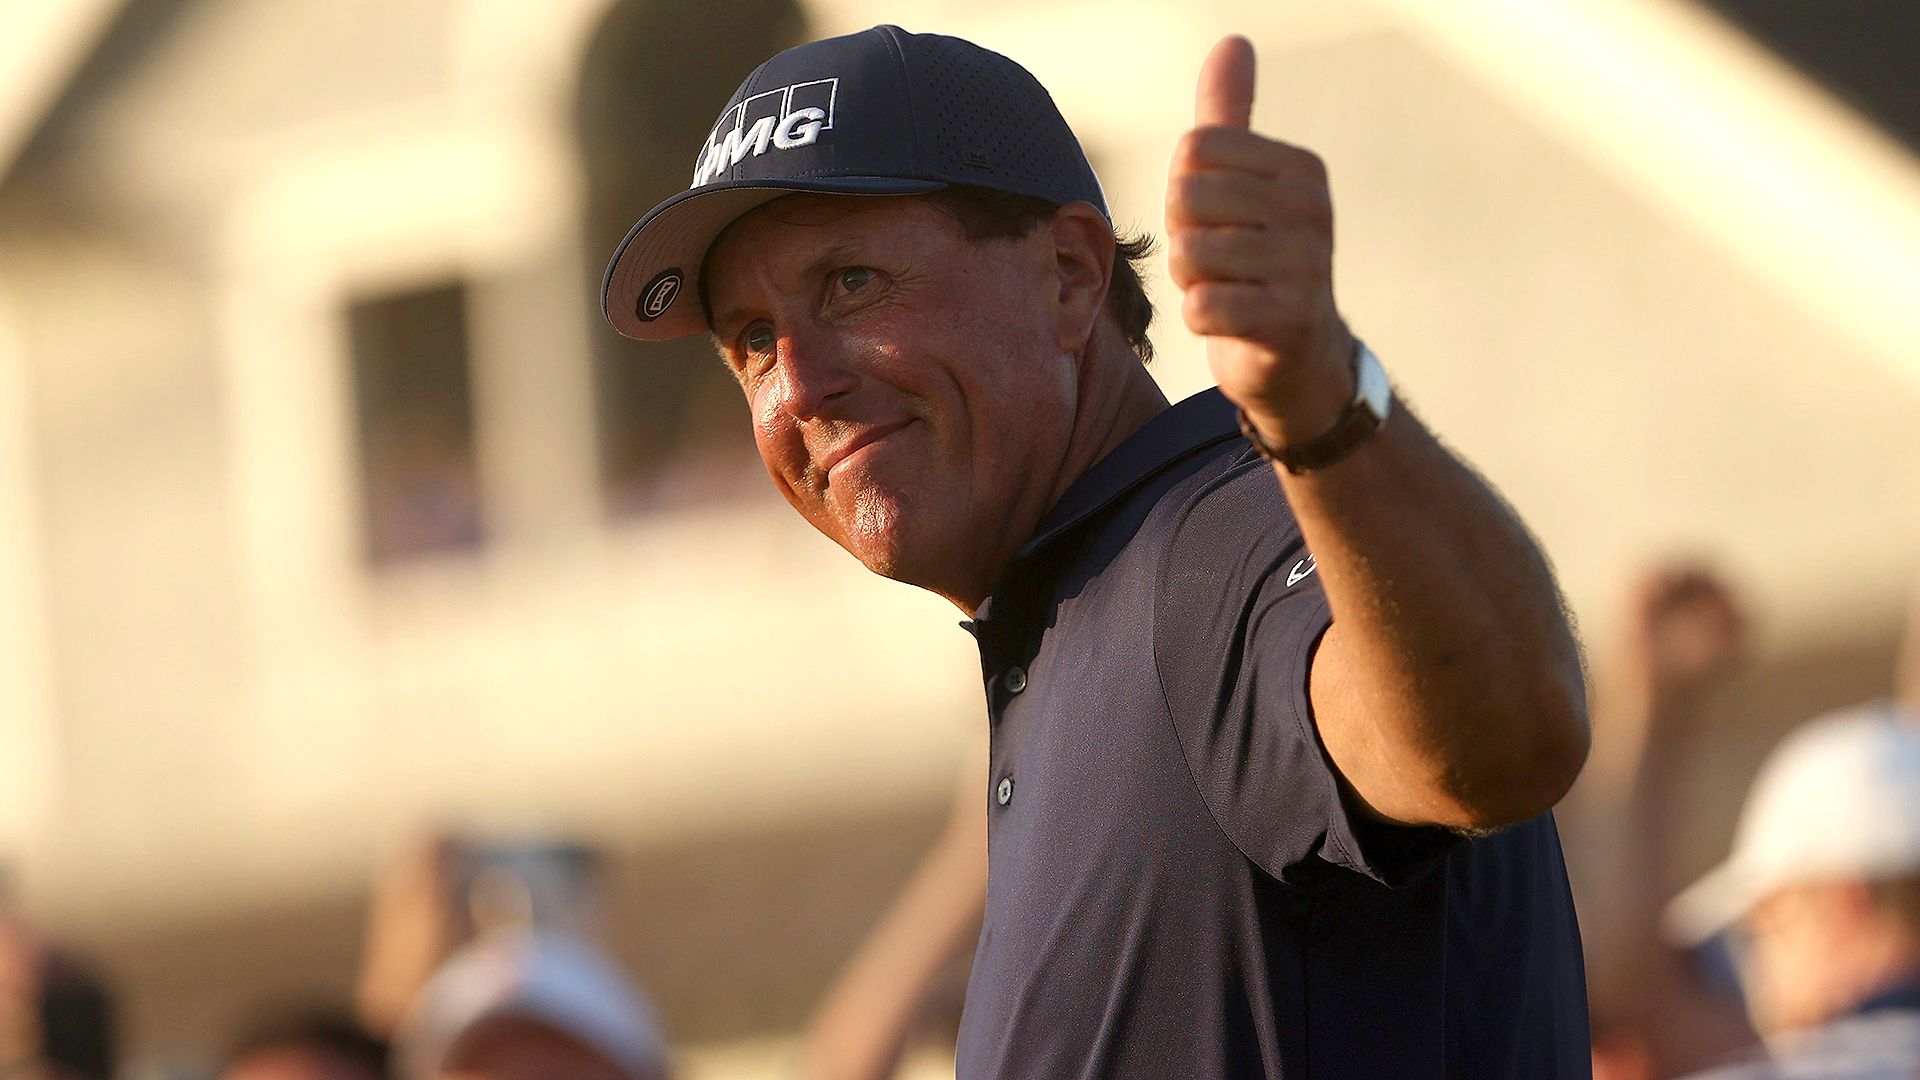 Phil Mickelson will start 2022 ending a 21-year hiatus at Sentry Tournament of Champions